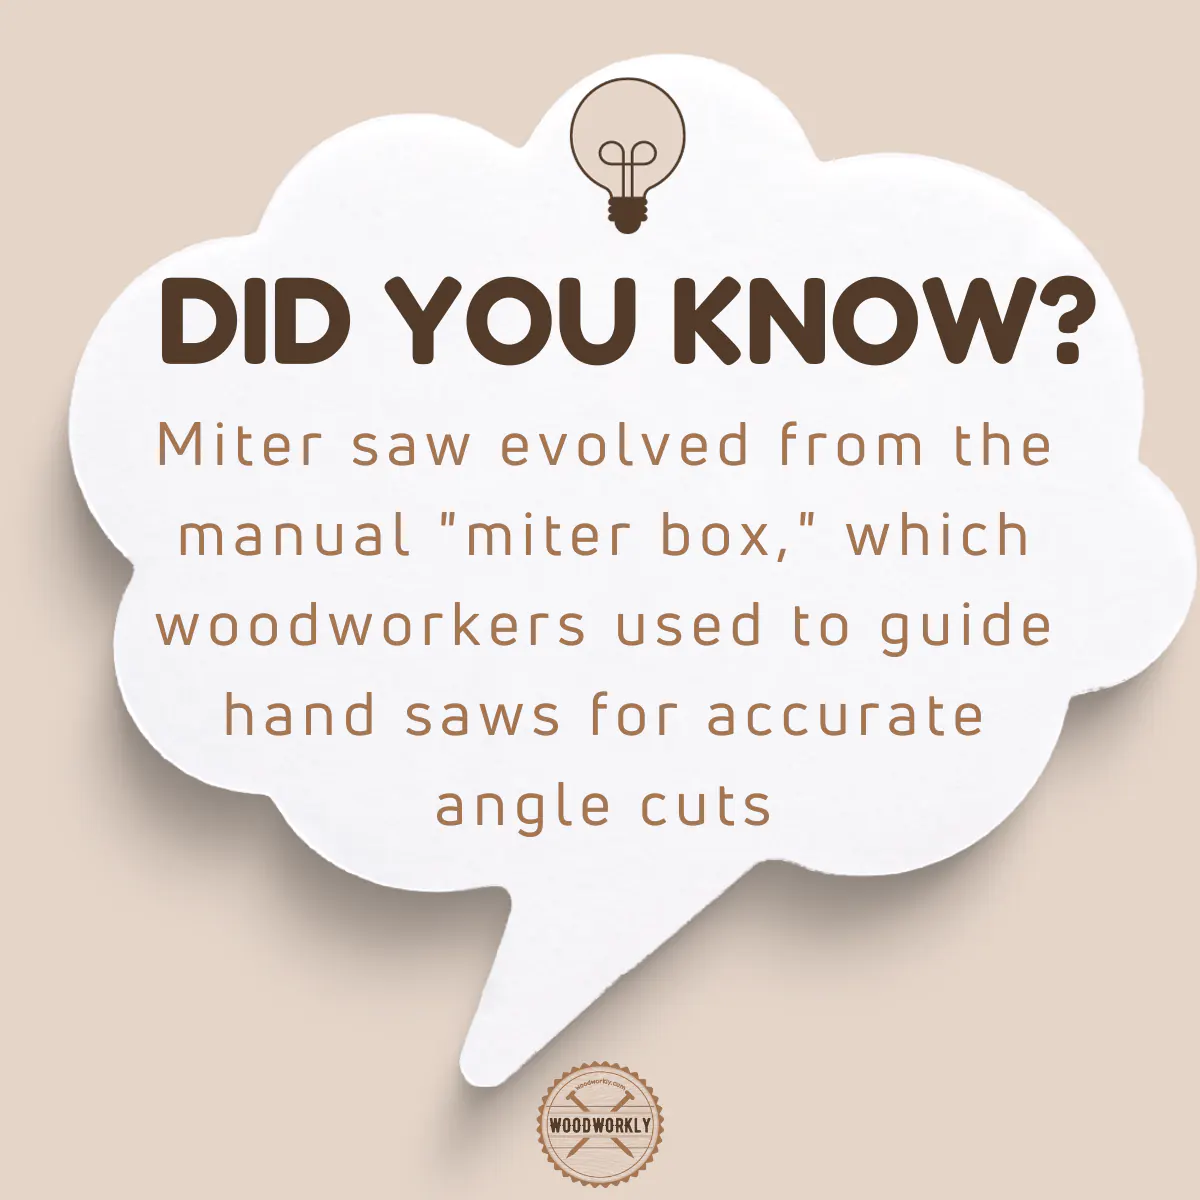 Did you know fact about Miter Saw